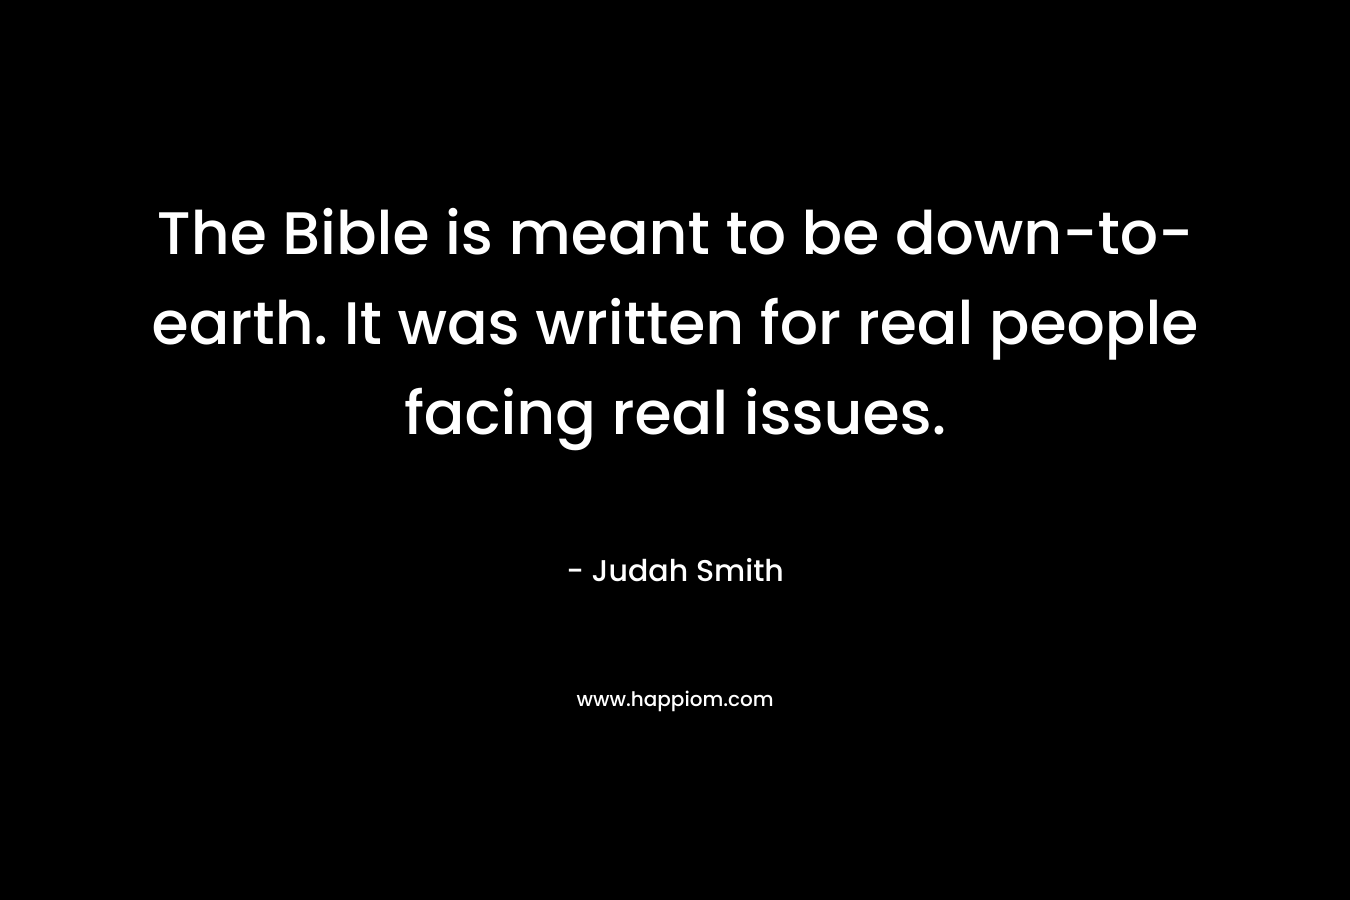 The Bible is meant to be down-to-earth. It was written for real people facing real issues.